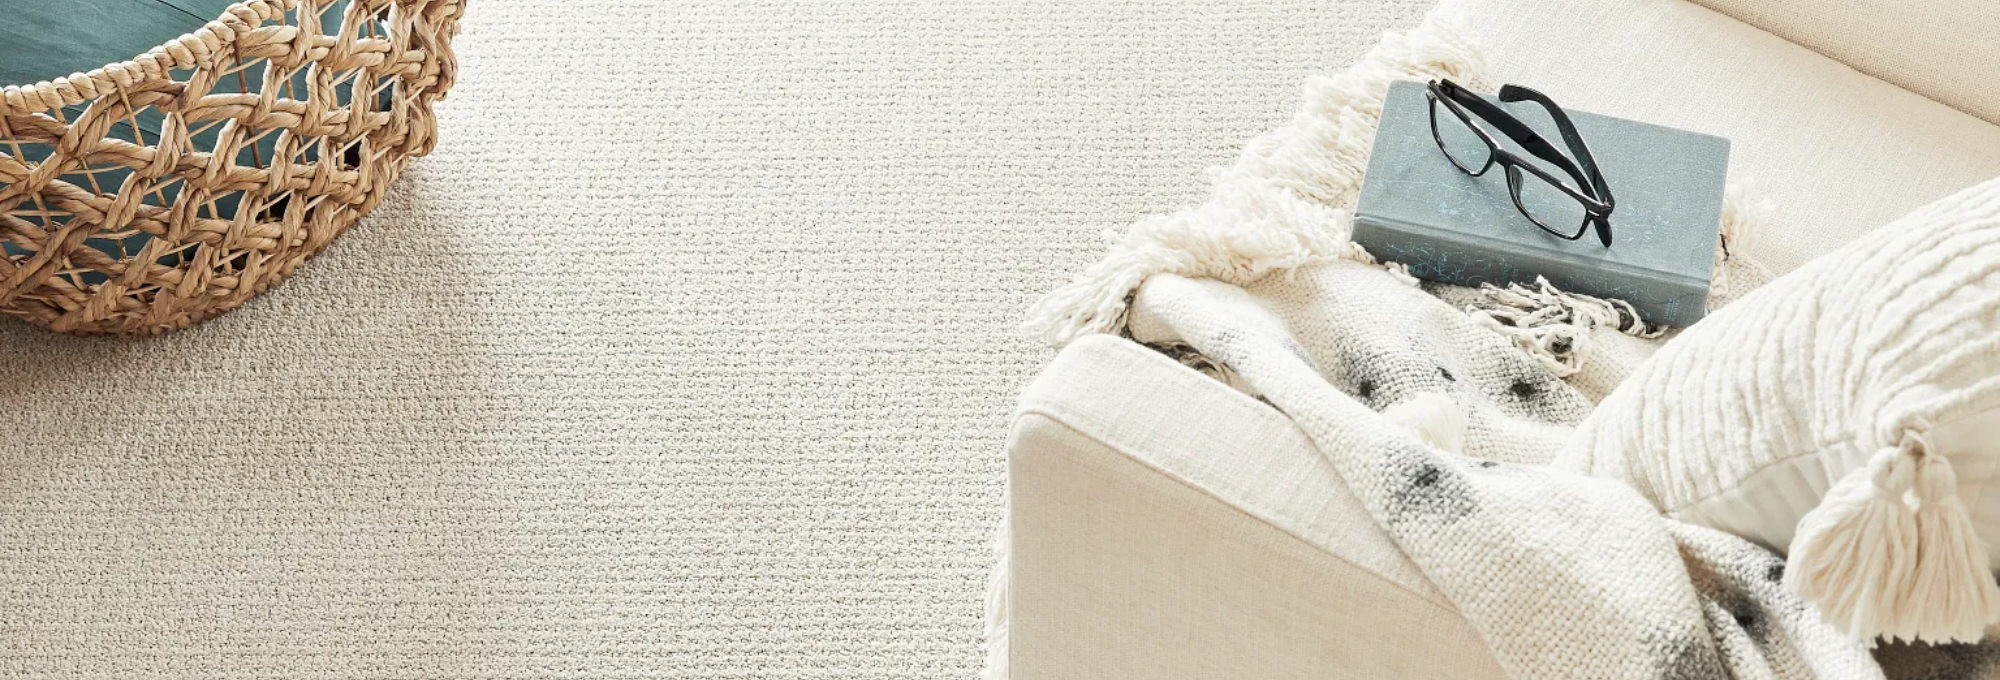 Shop Flooring Products from House of Carpet Inc in Richmond